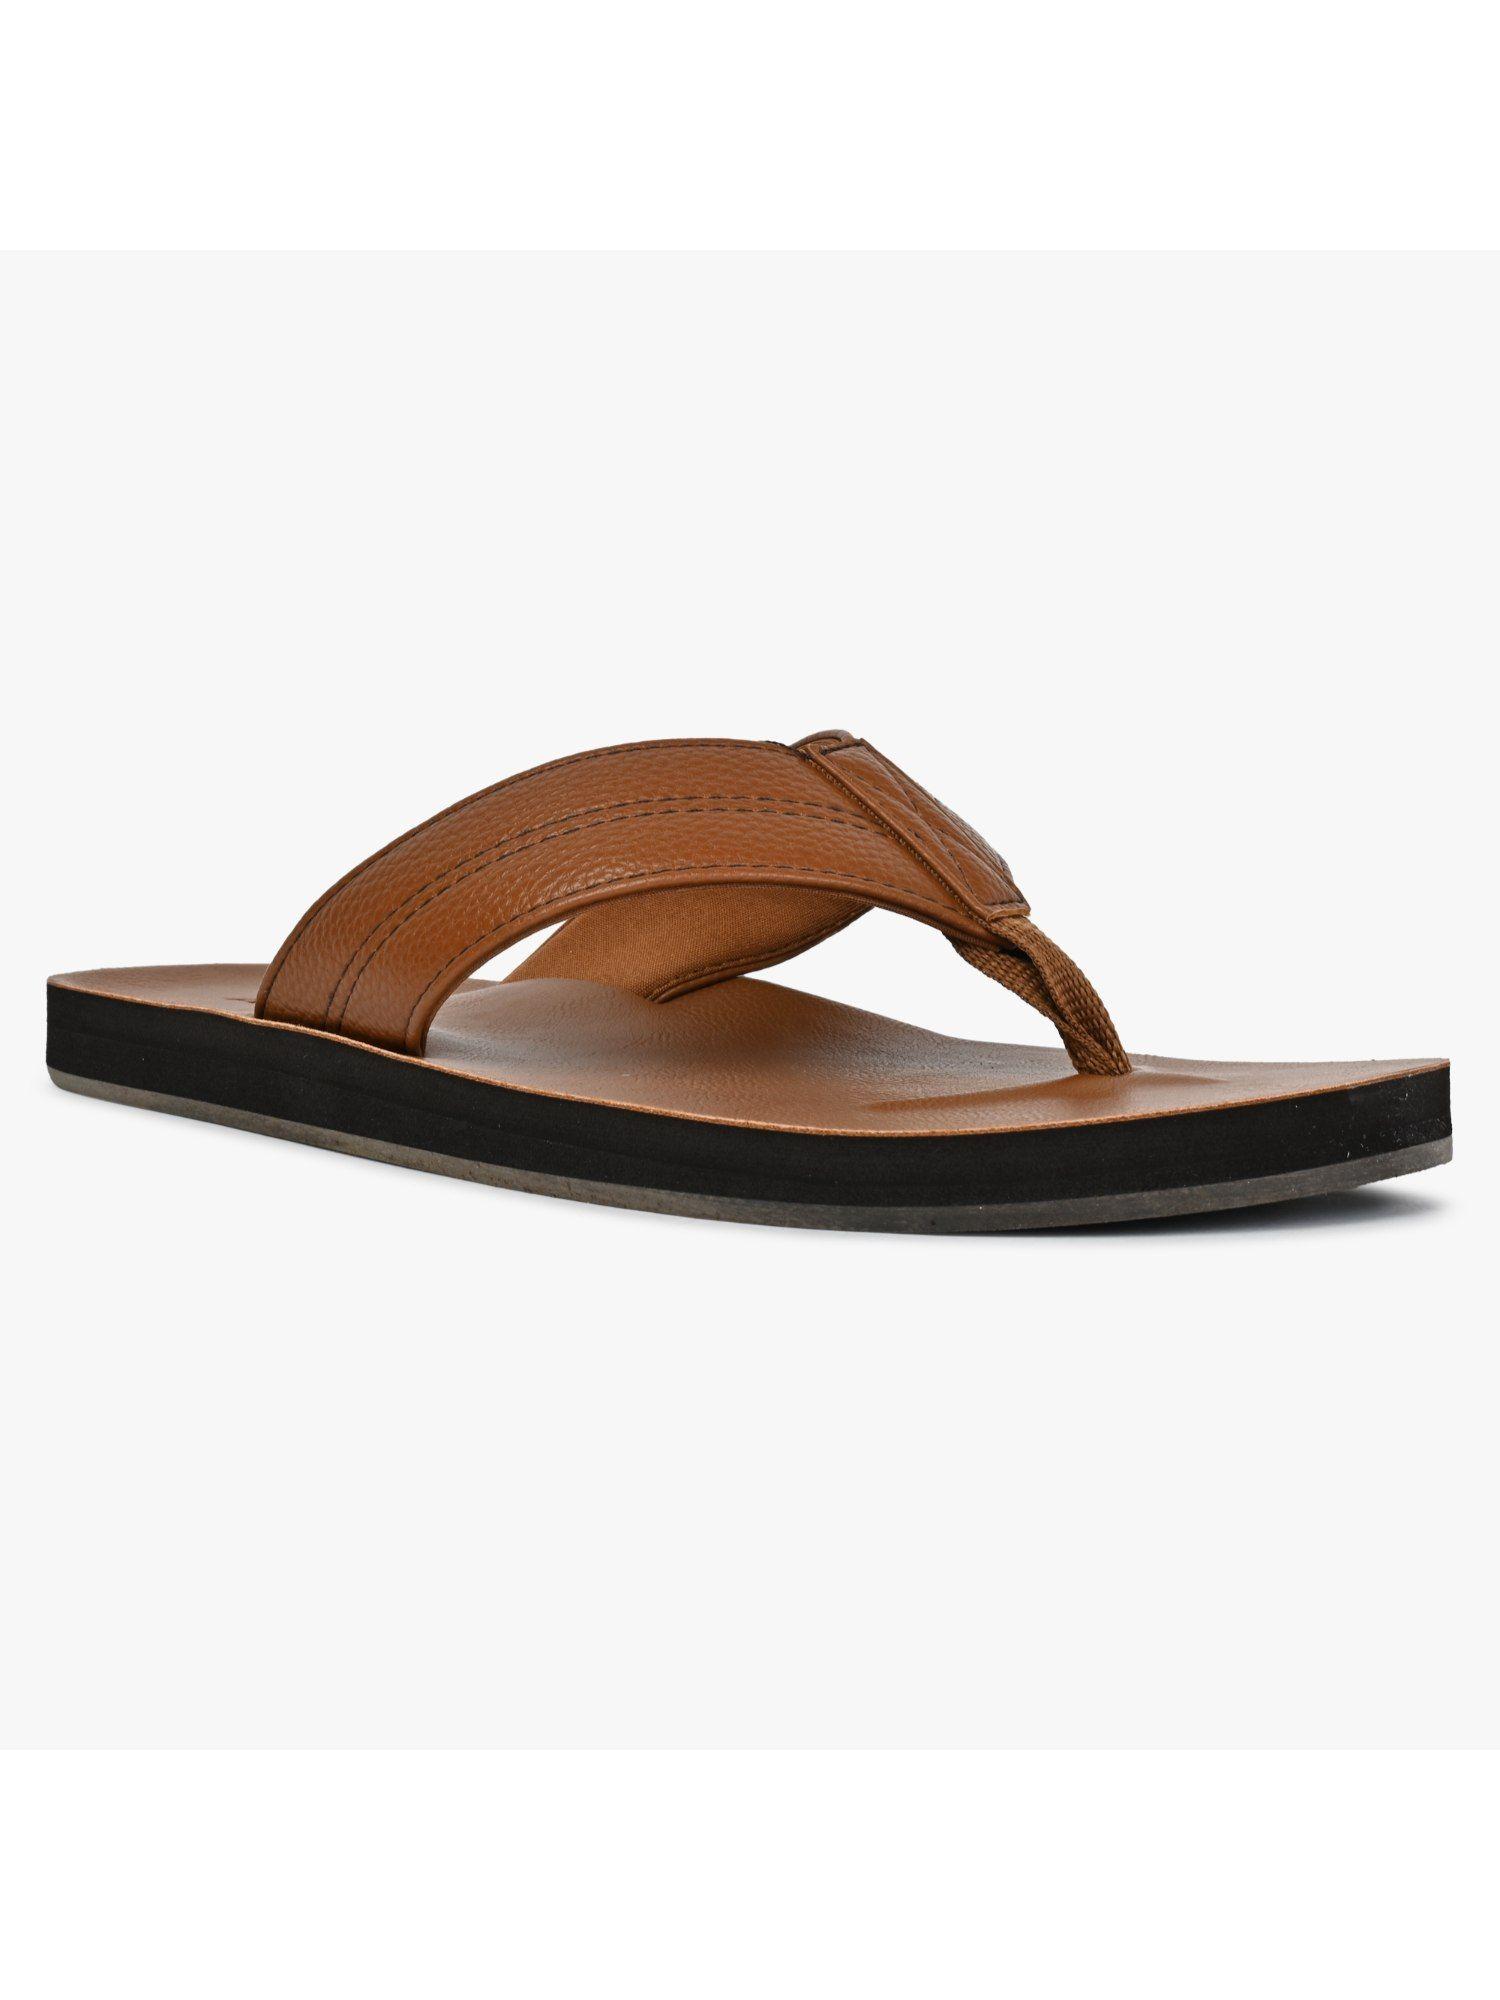 tribord220-tan-synthetic-flipflops